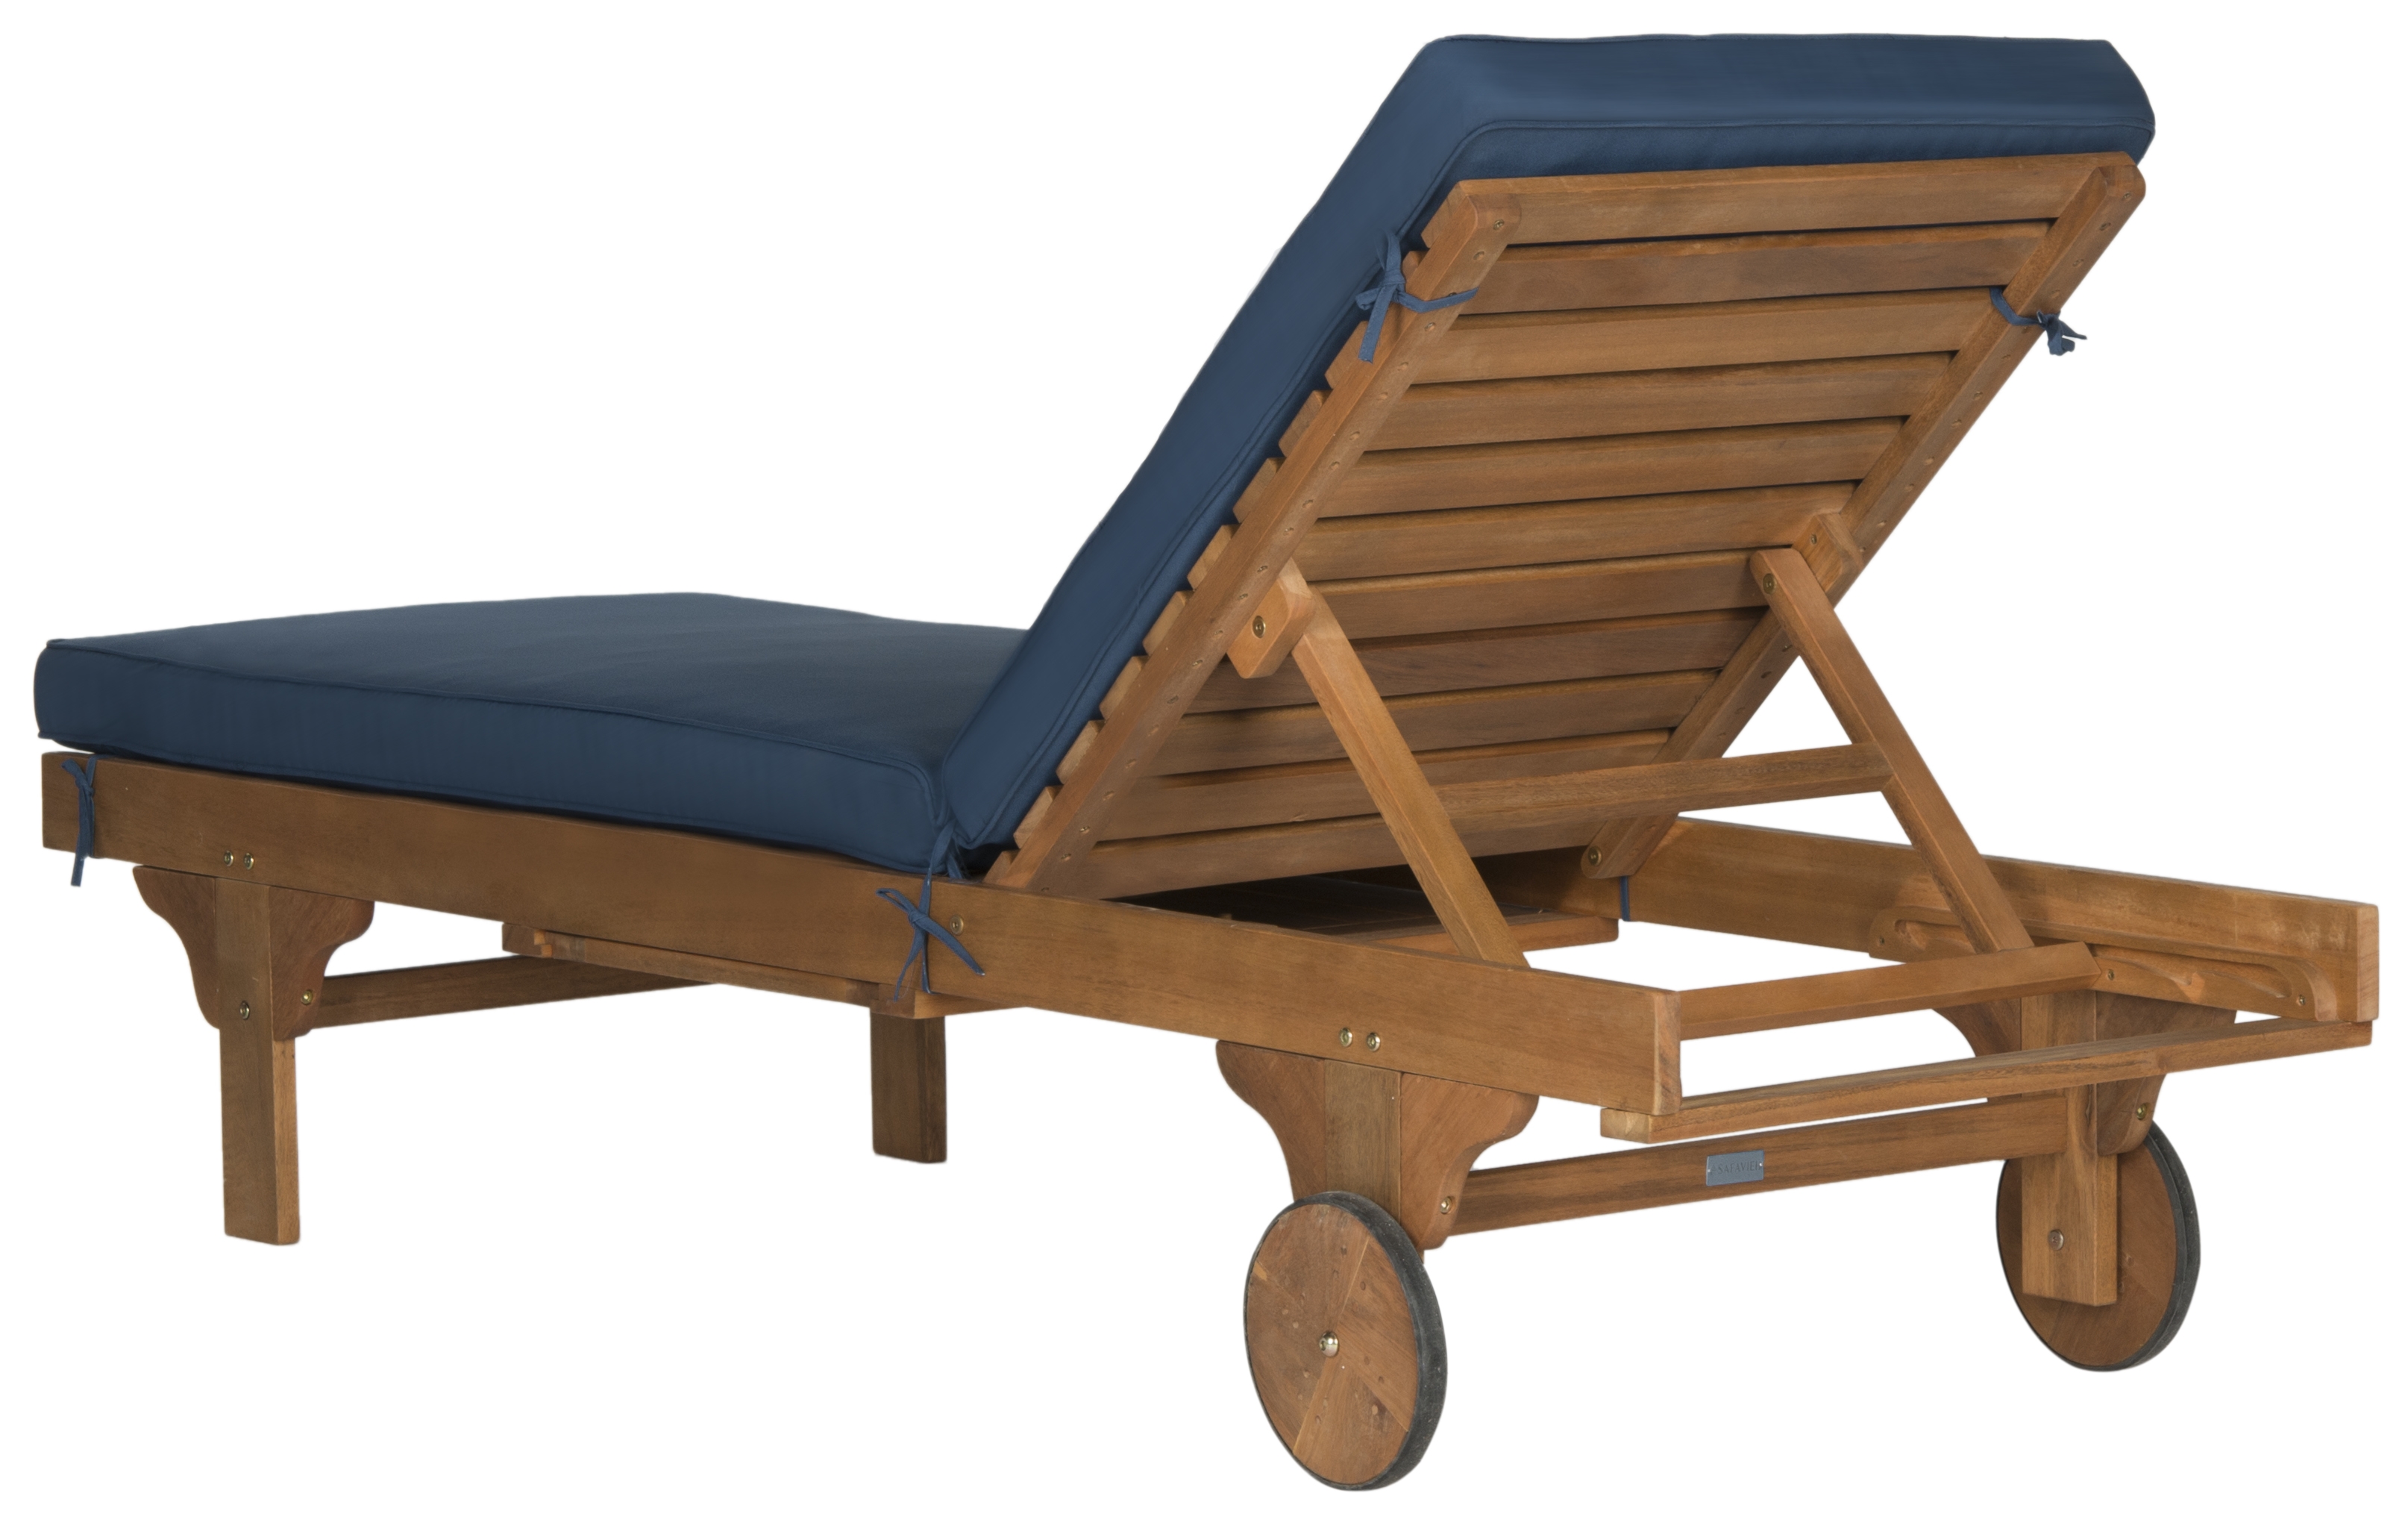 Newport Chaise Lounge Chair With Side Table - Natural/Navy - Safavieh - Image 2